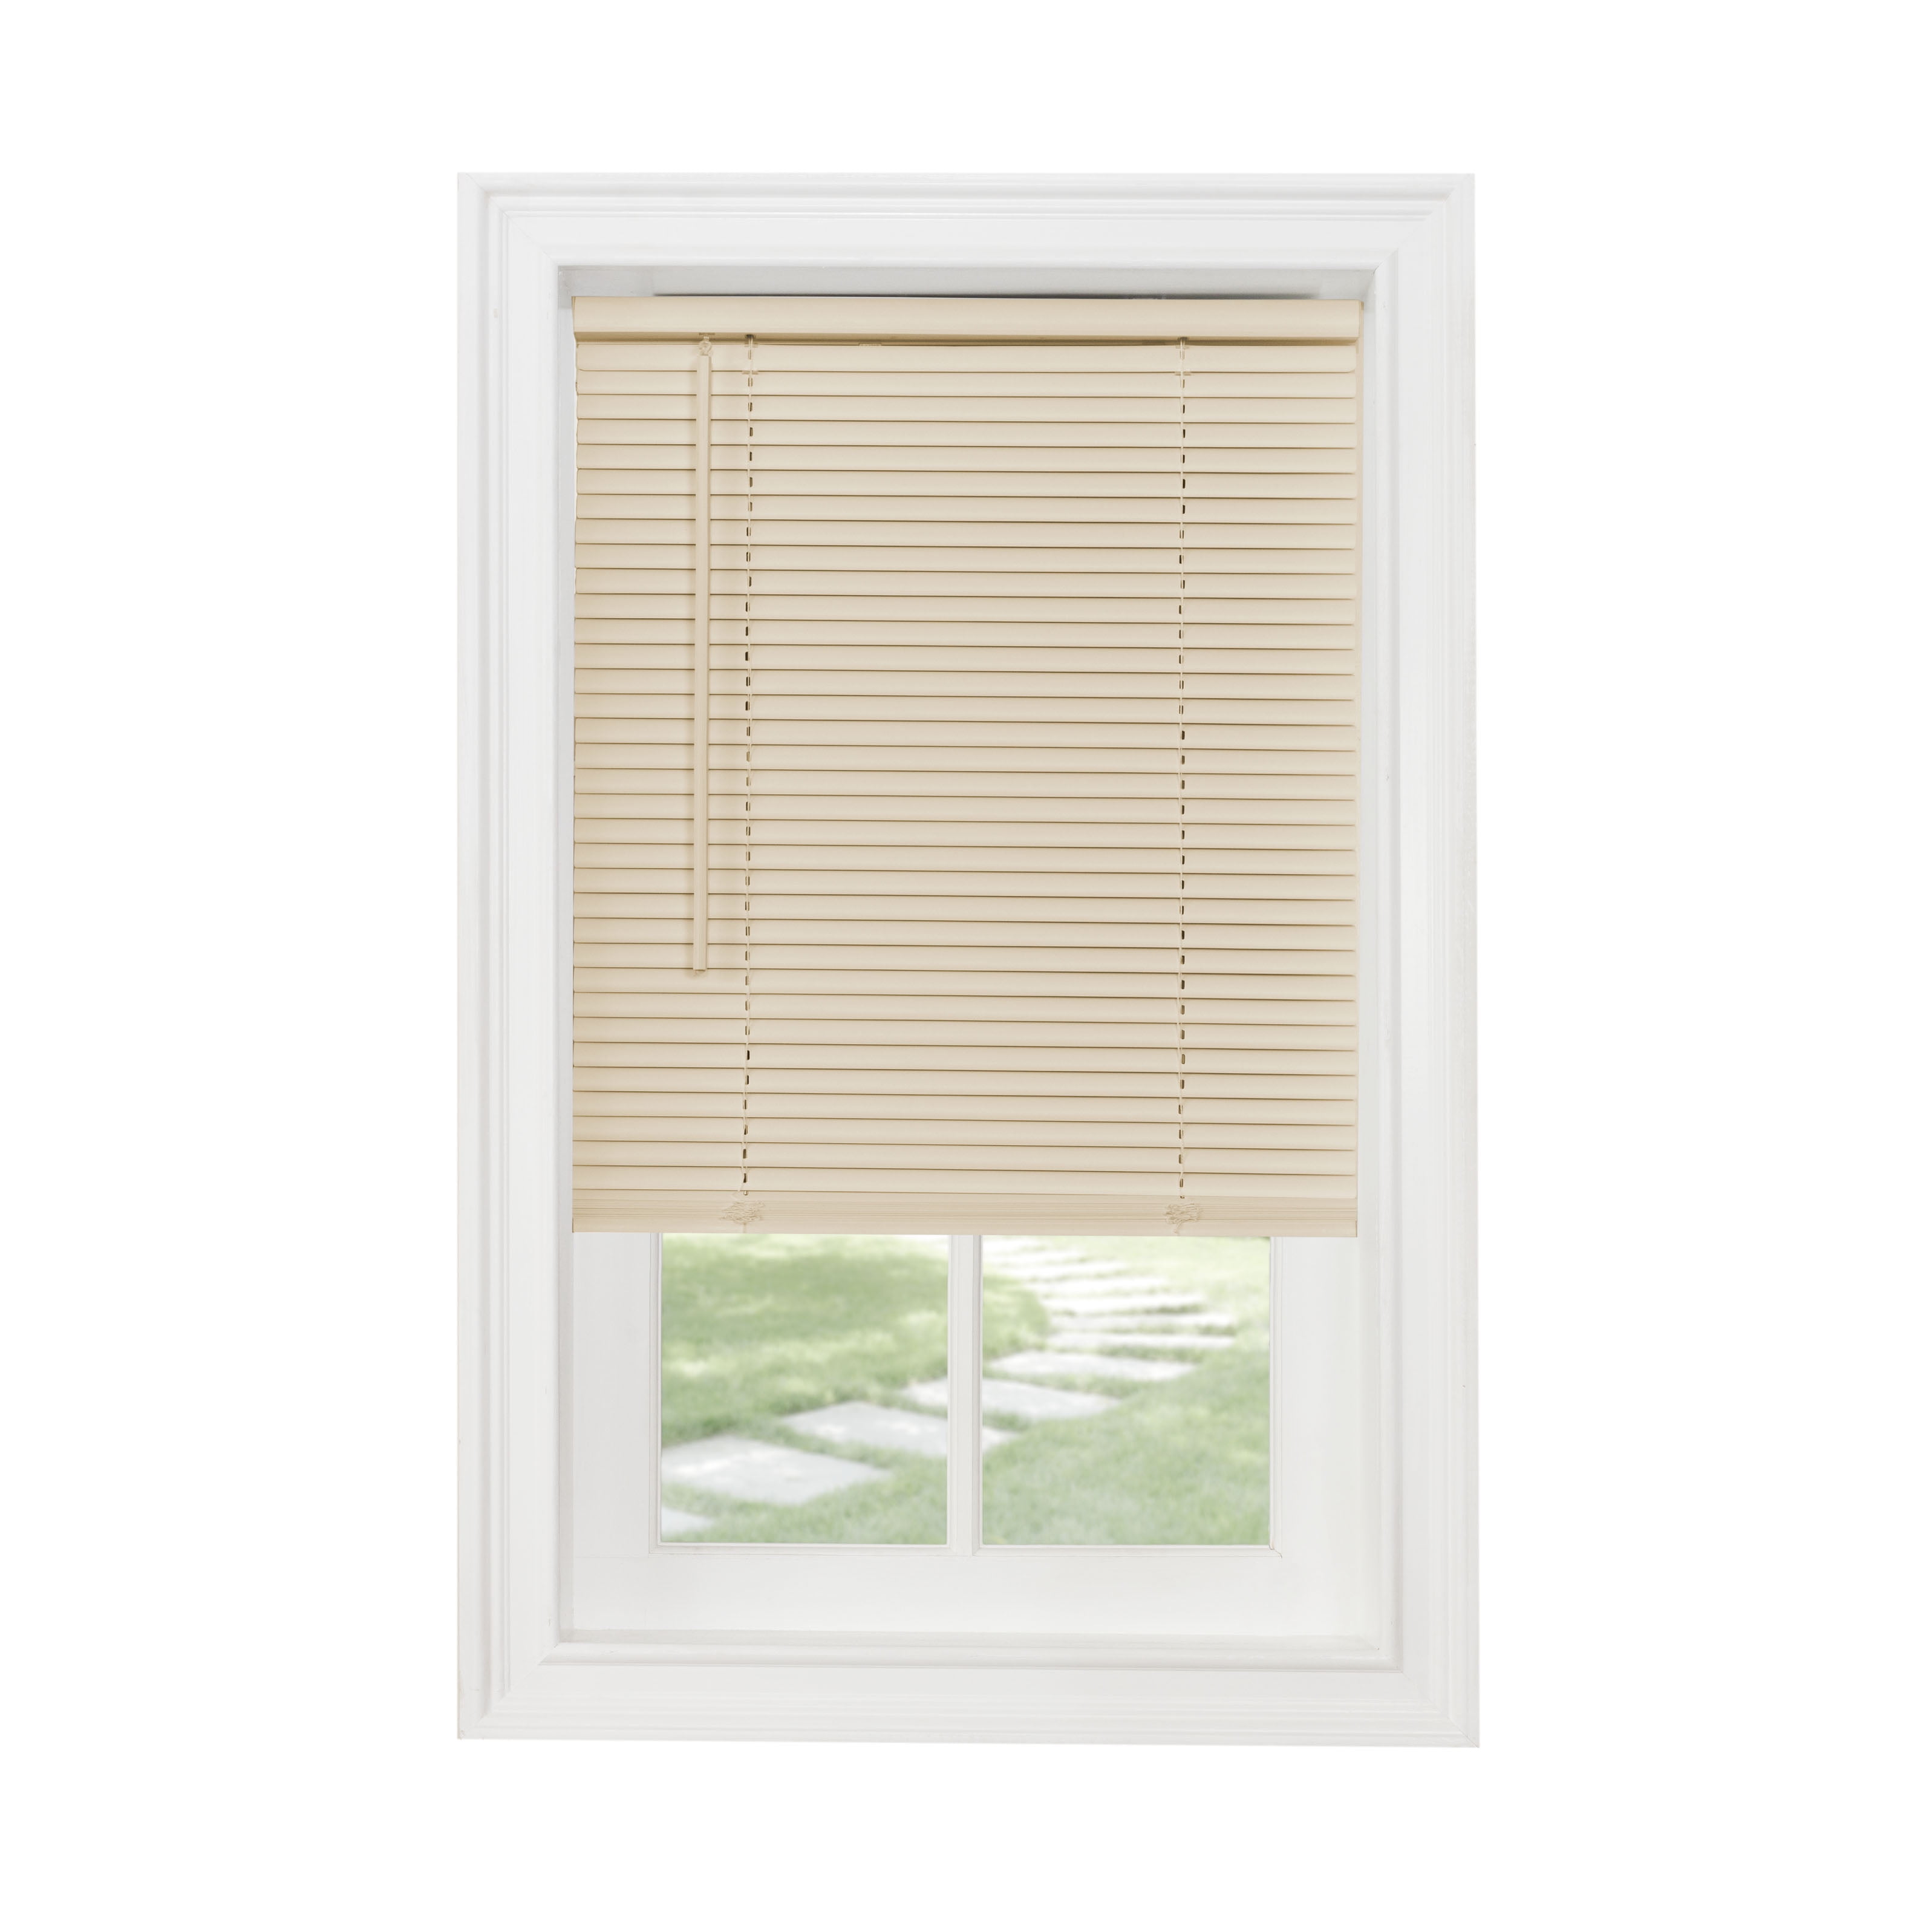 Picture of Achim MSG257AL04 57 x 64 in. GII Morningstar Cordless Light Filtering Vinyl Mini Blinds with 1 in. Slats, Alabaster